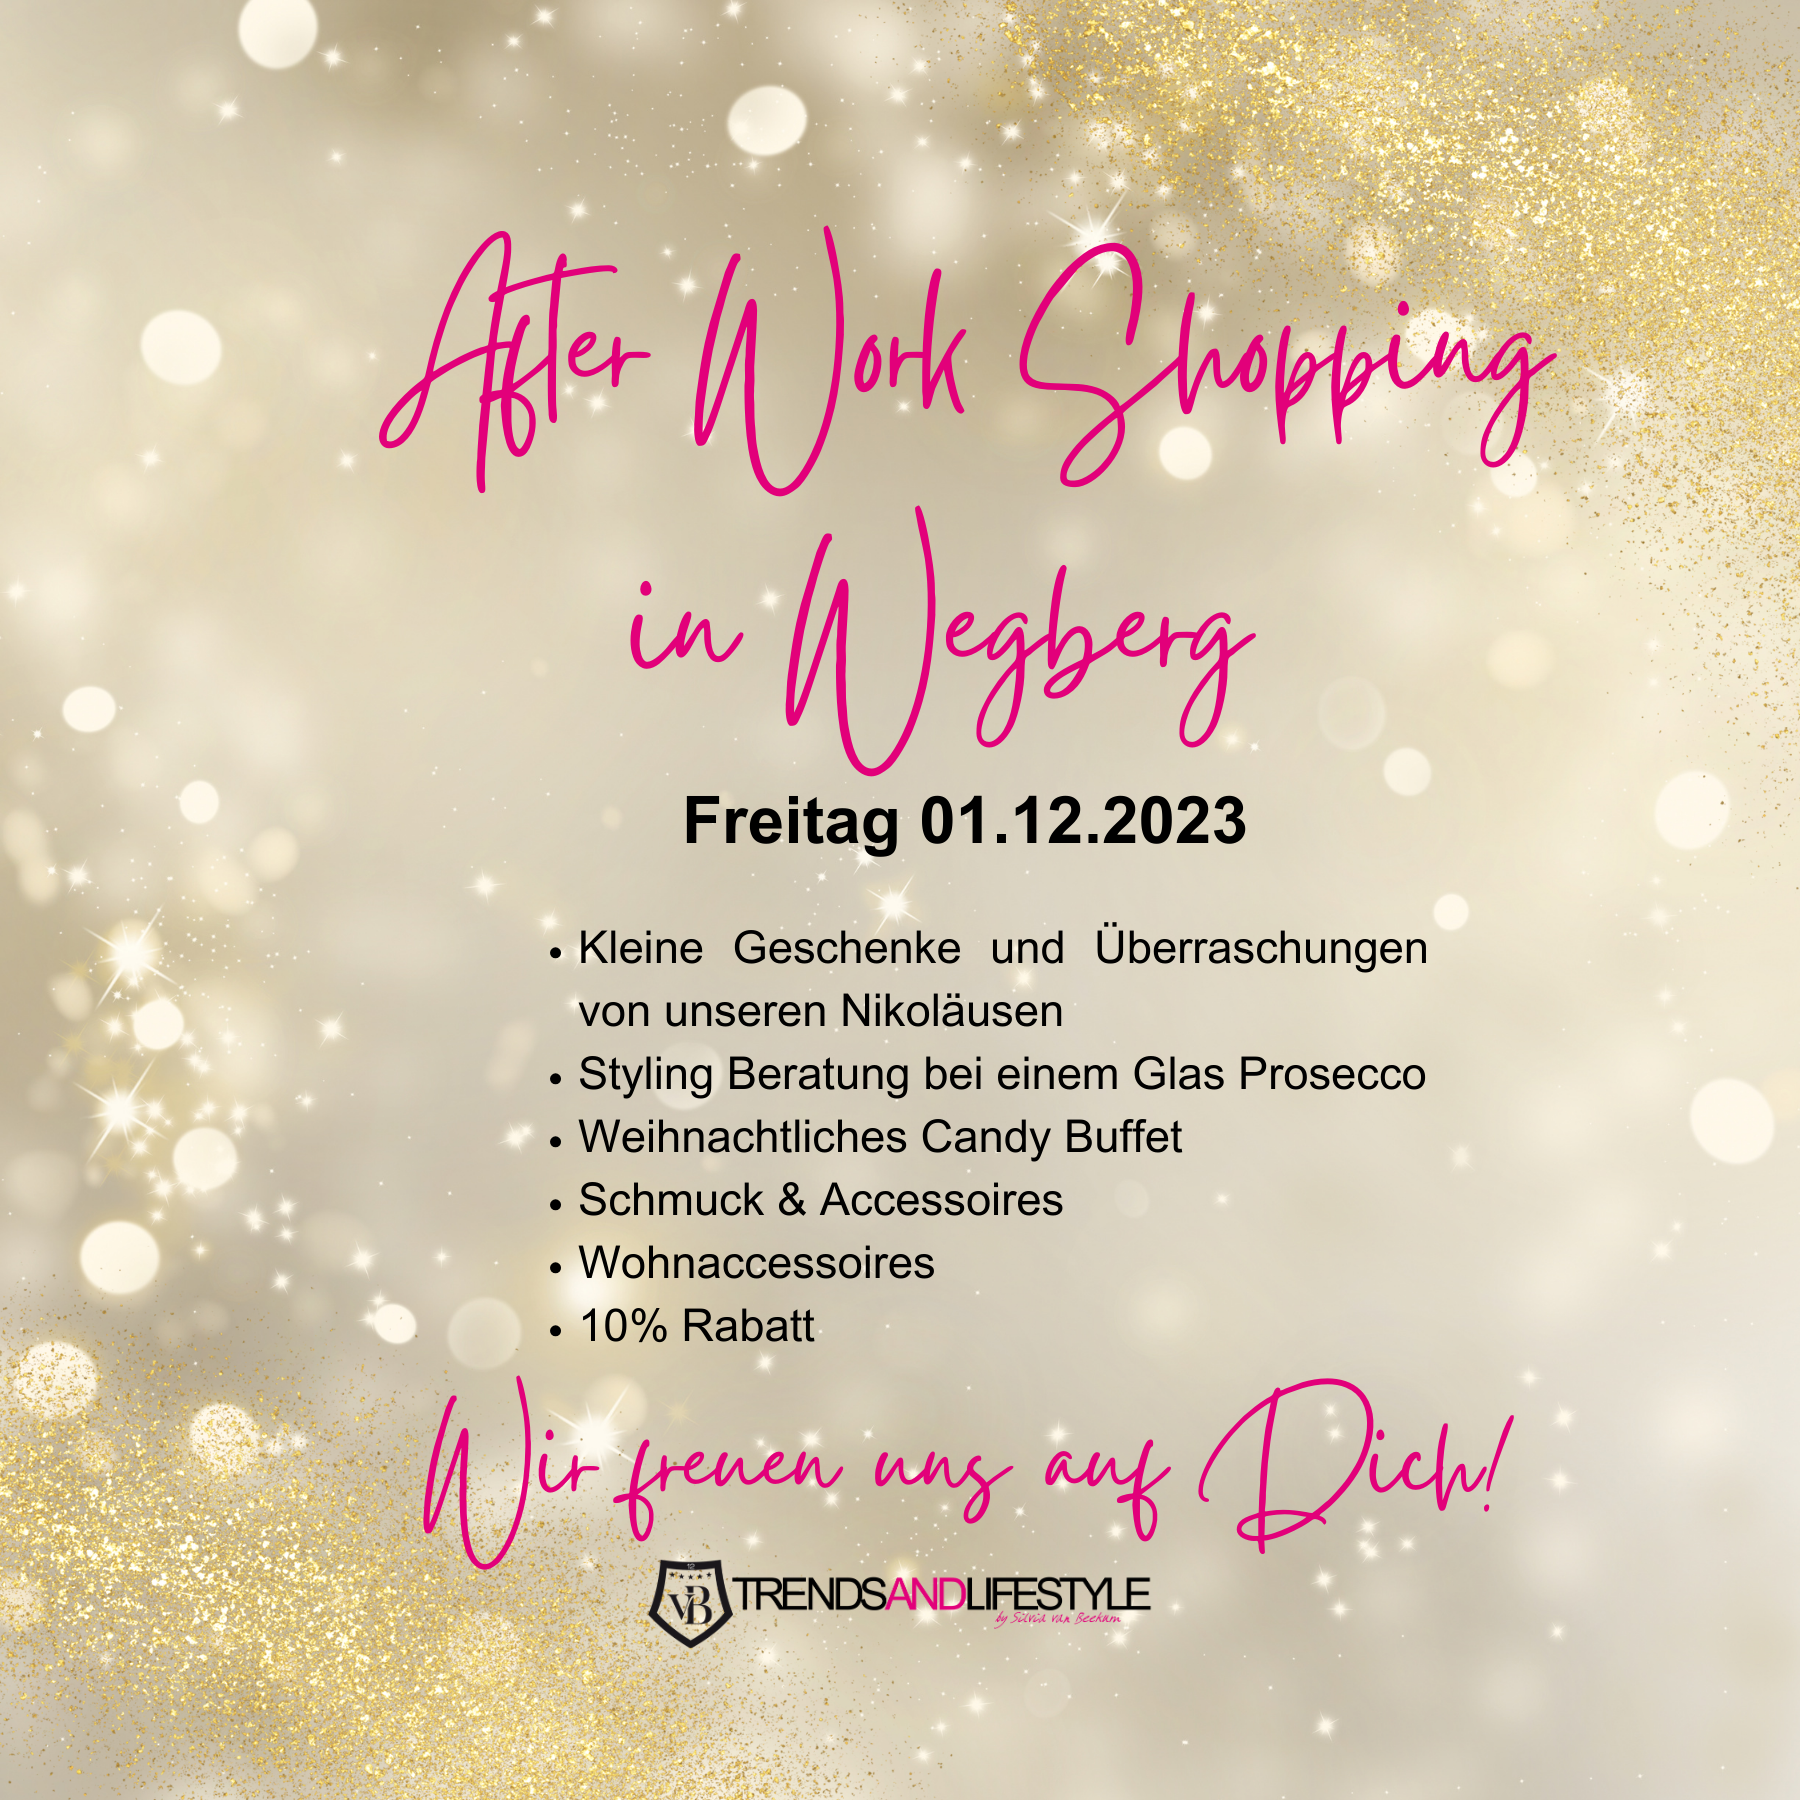 Weihnachts – After Work Shopping | Freitag 01.12.2023